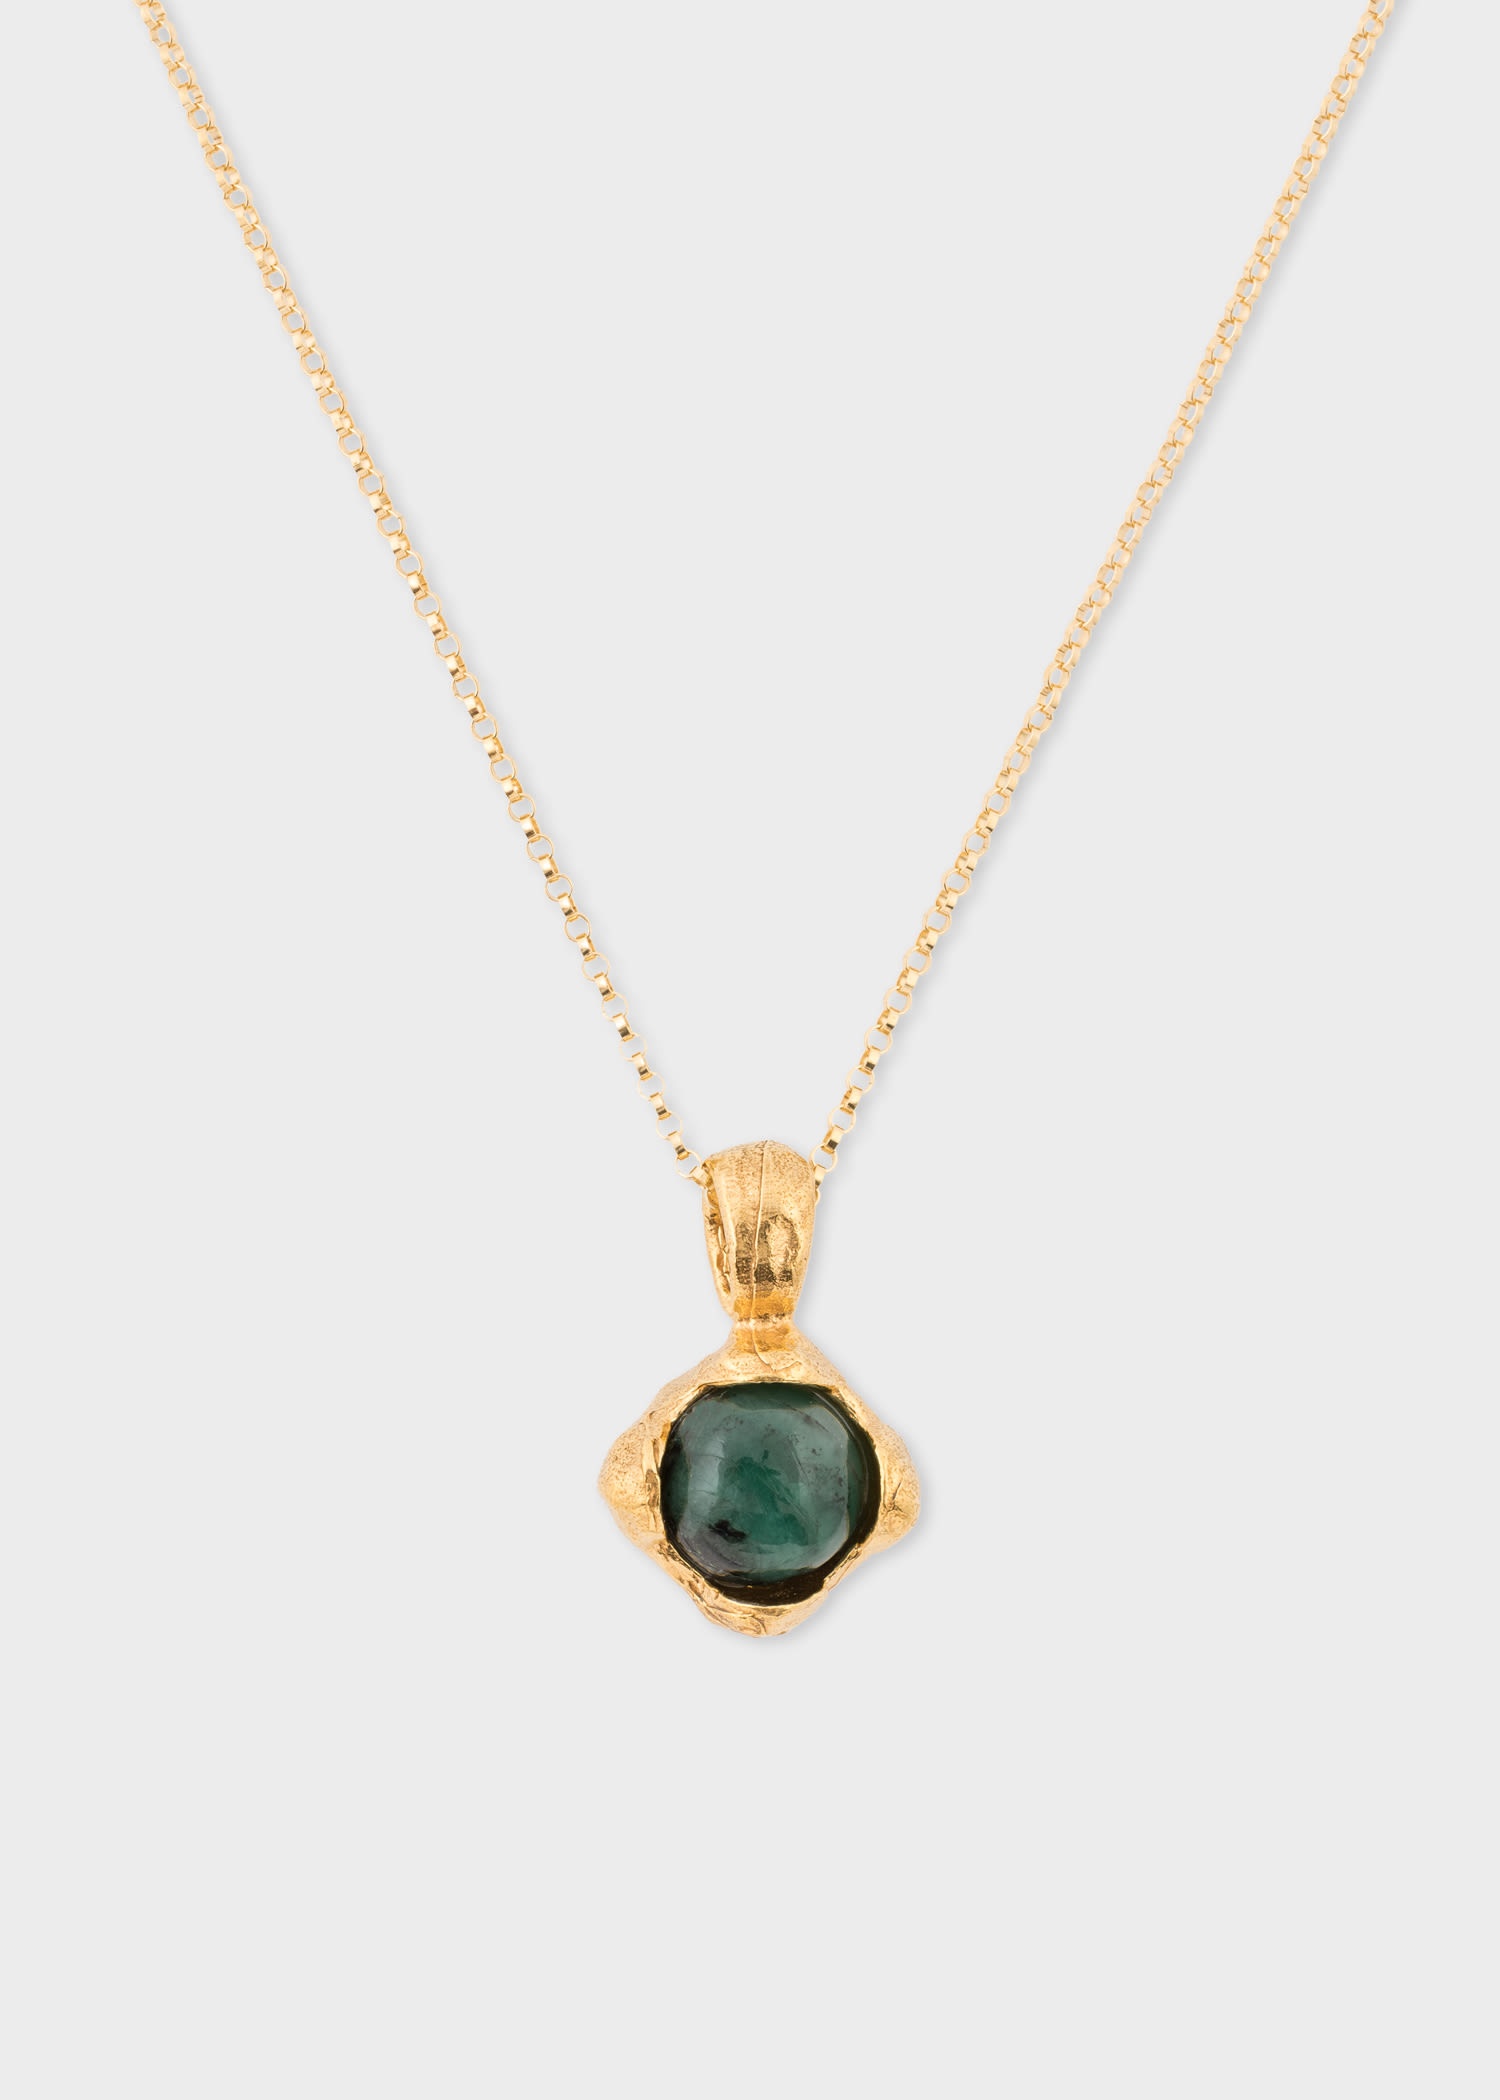 'The Eye of the Storm' Emerald Necklace by Alighieri - 1